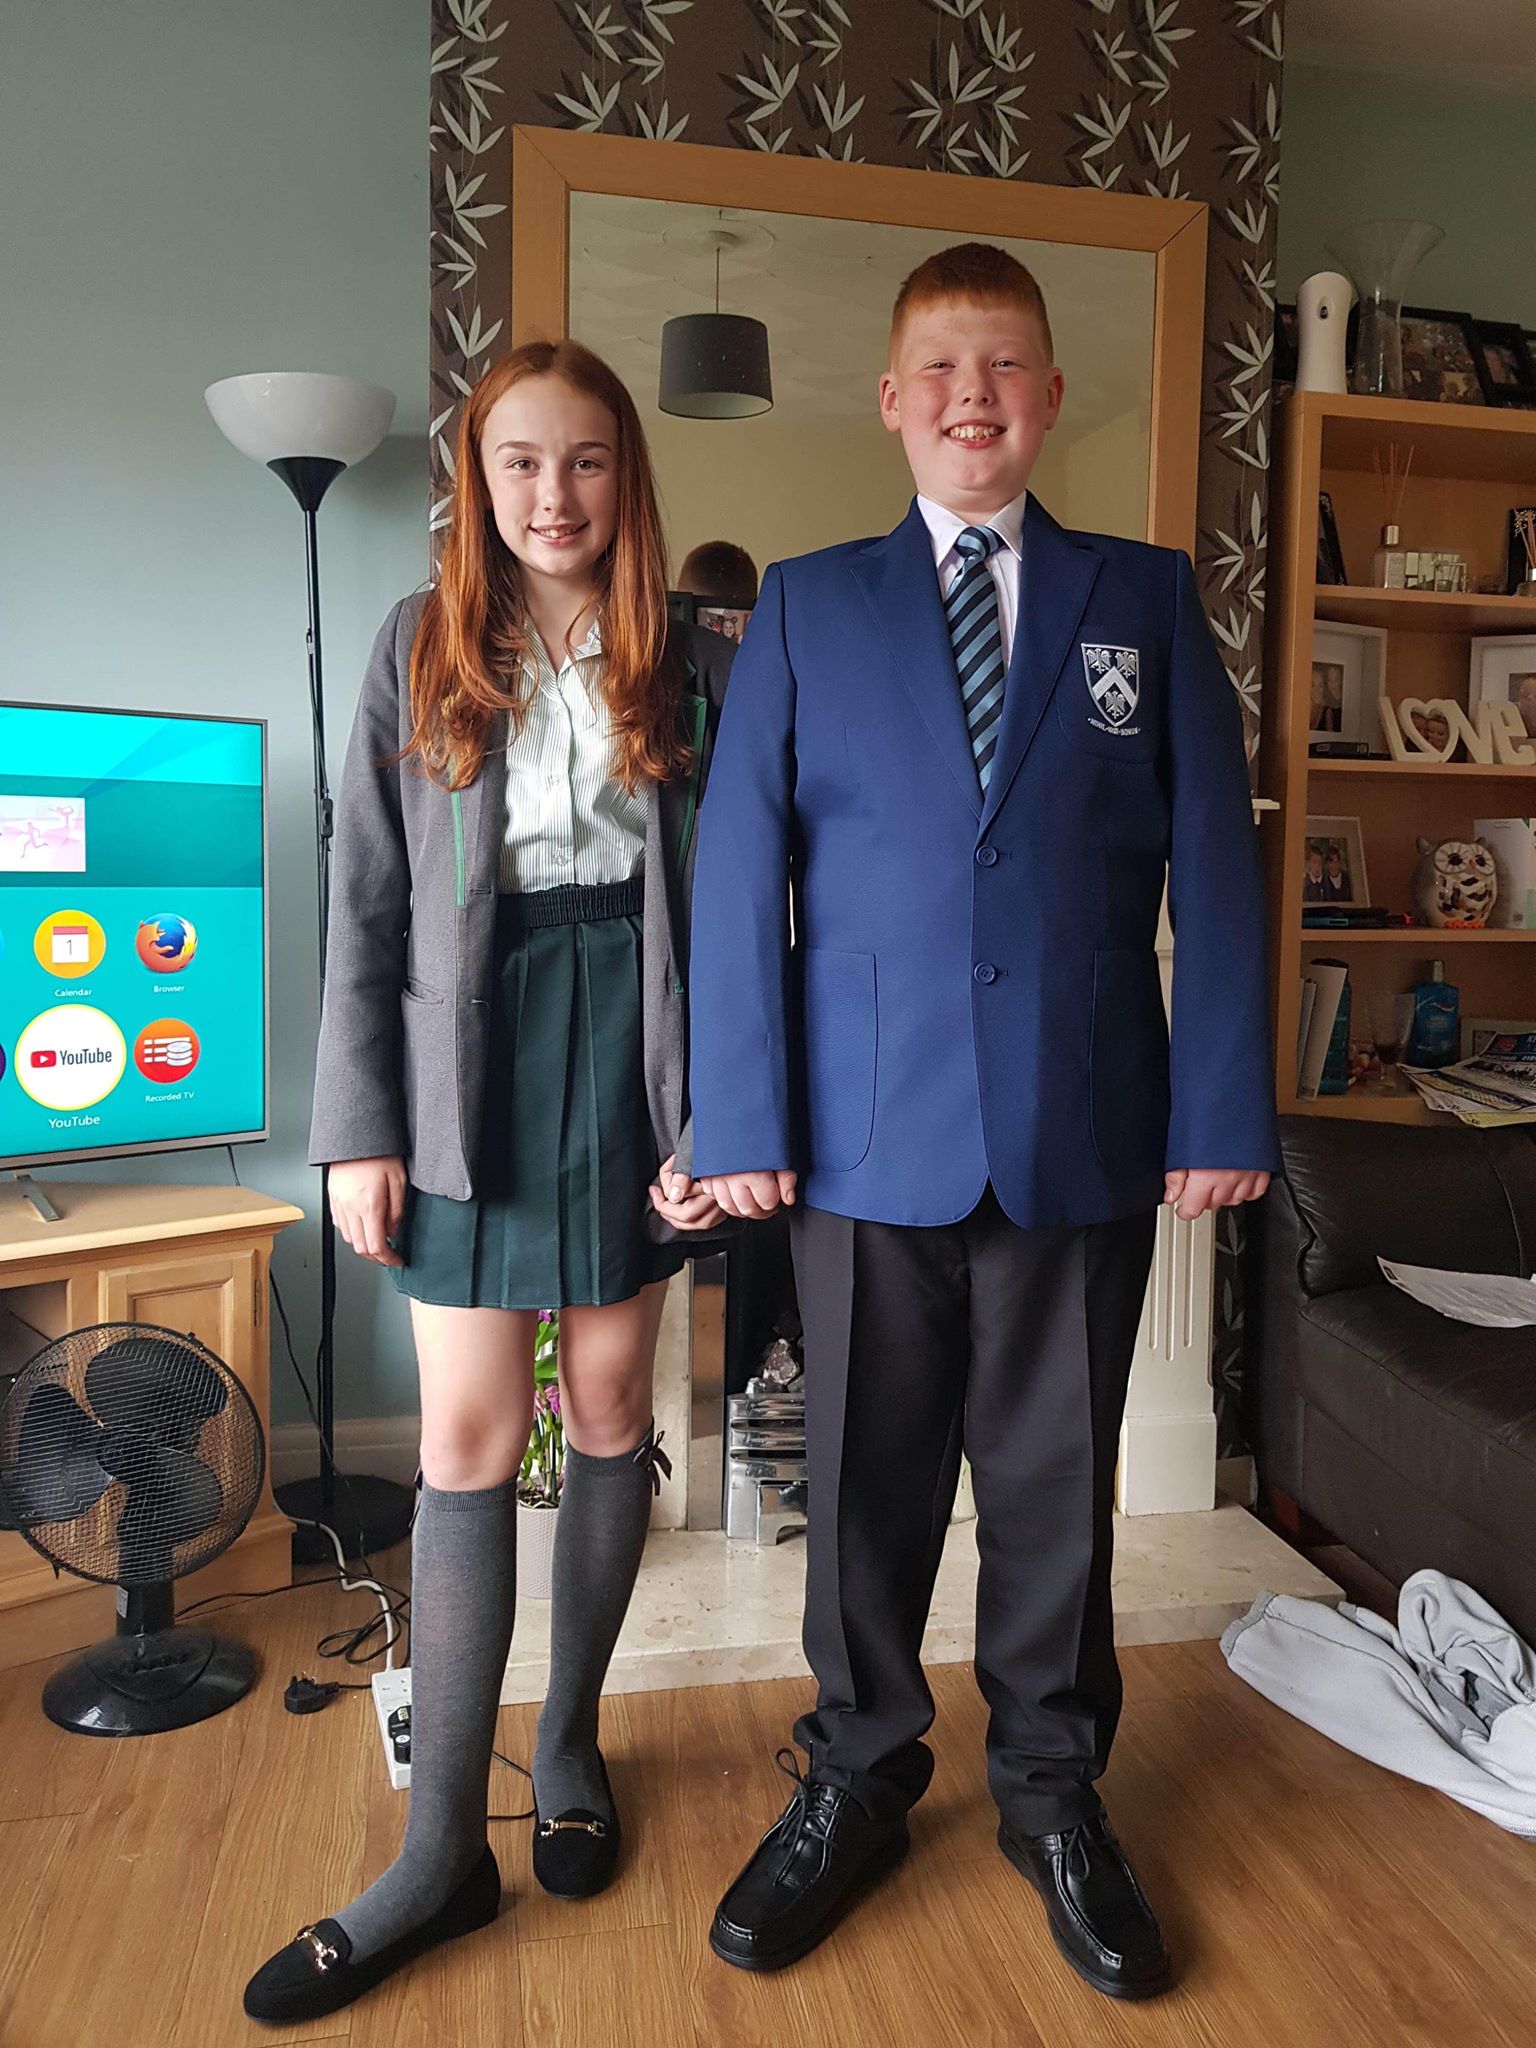 Lewis Wright, aged 12, from Southport, has been diagnosed with leukaemia. He is pictured with big sister, Caitlin.